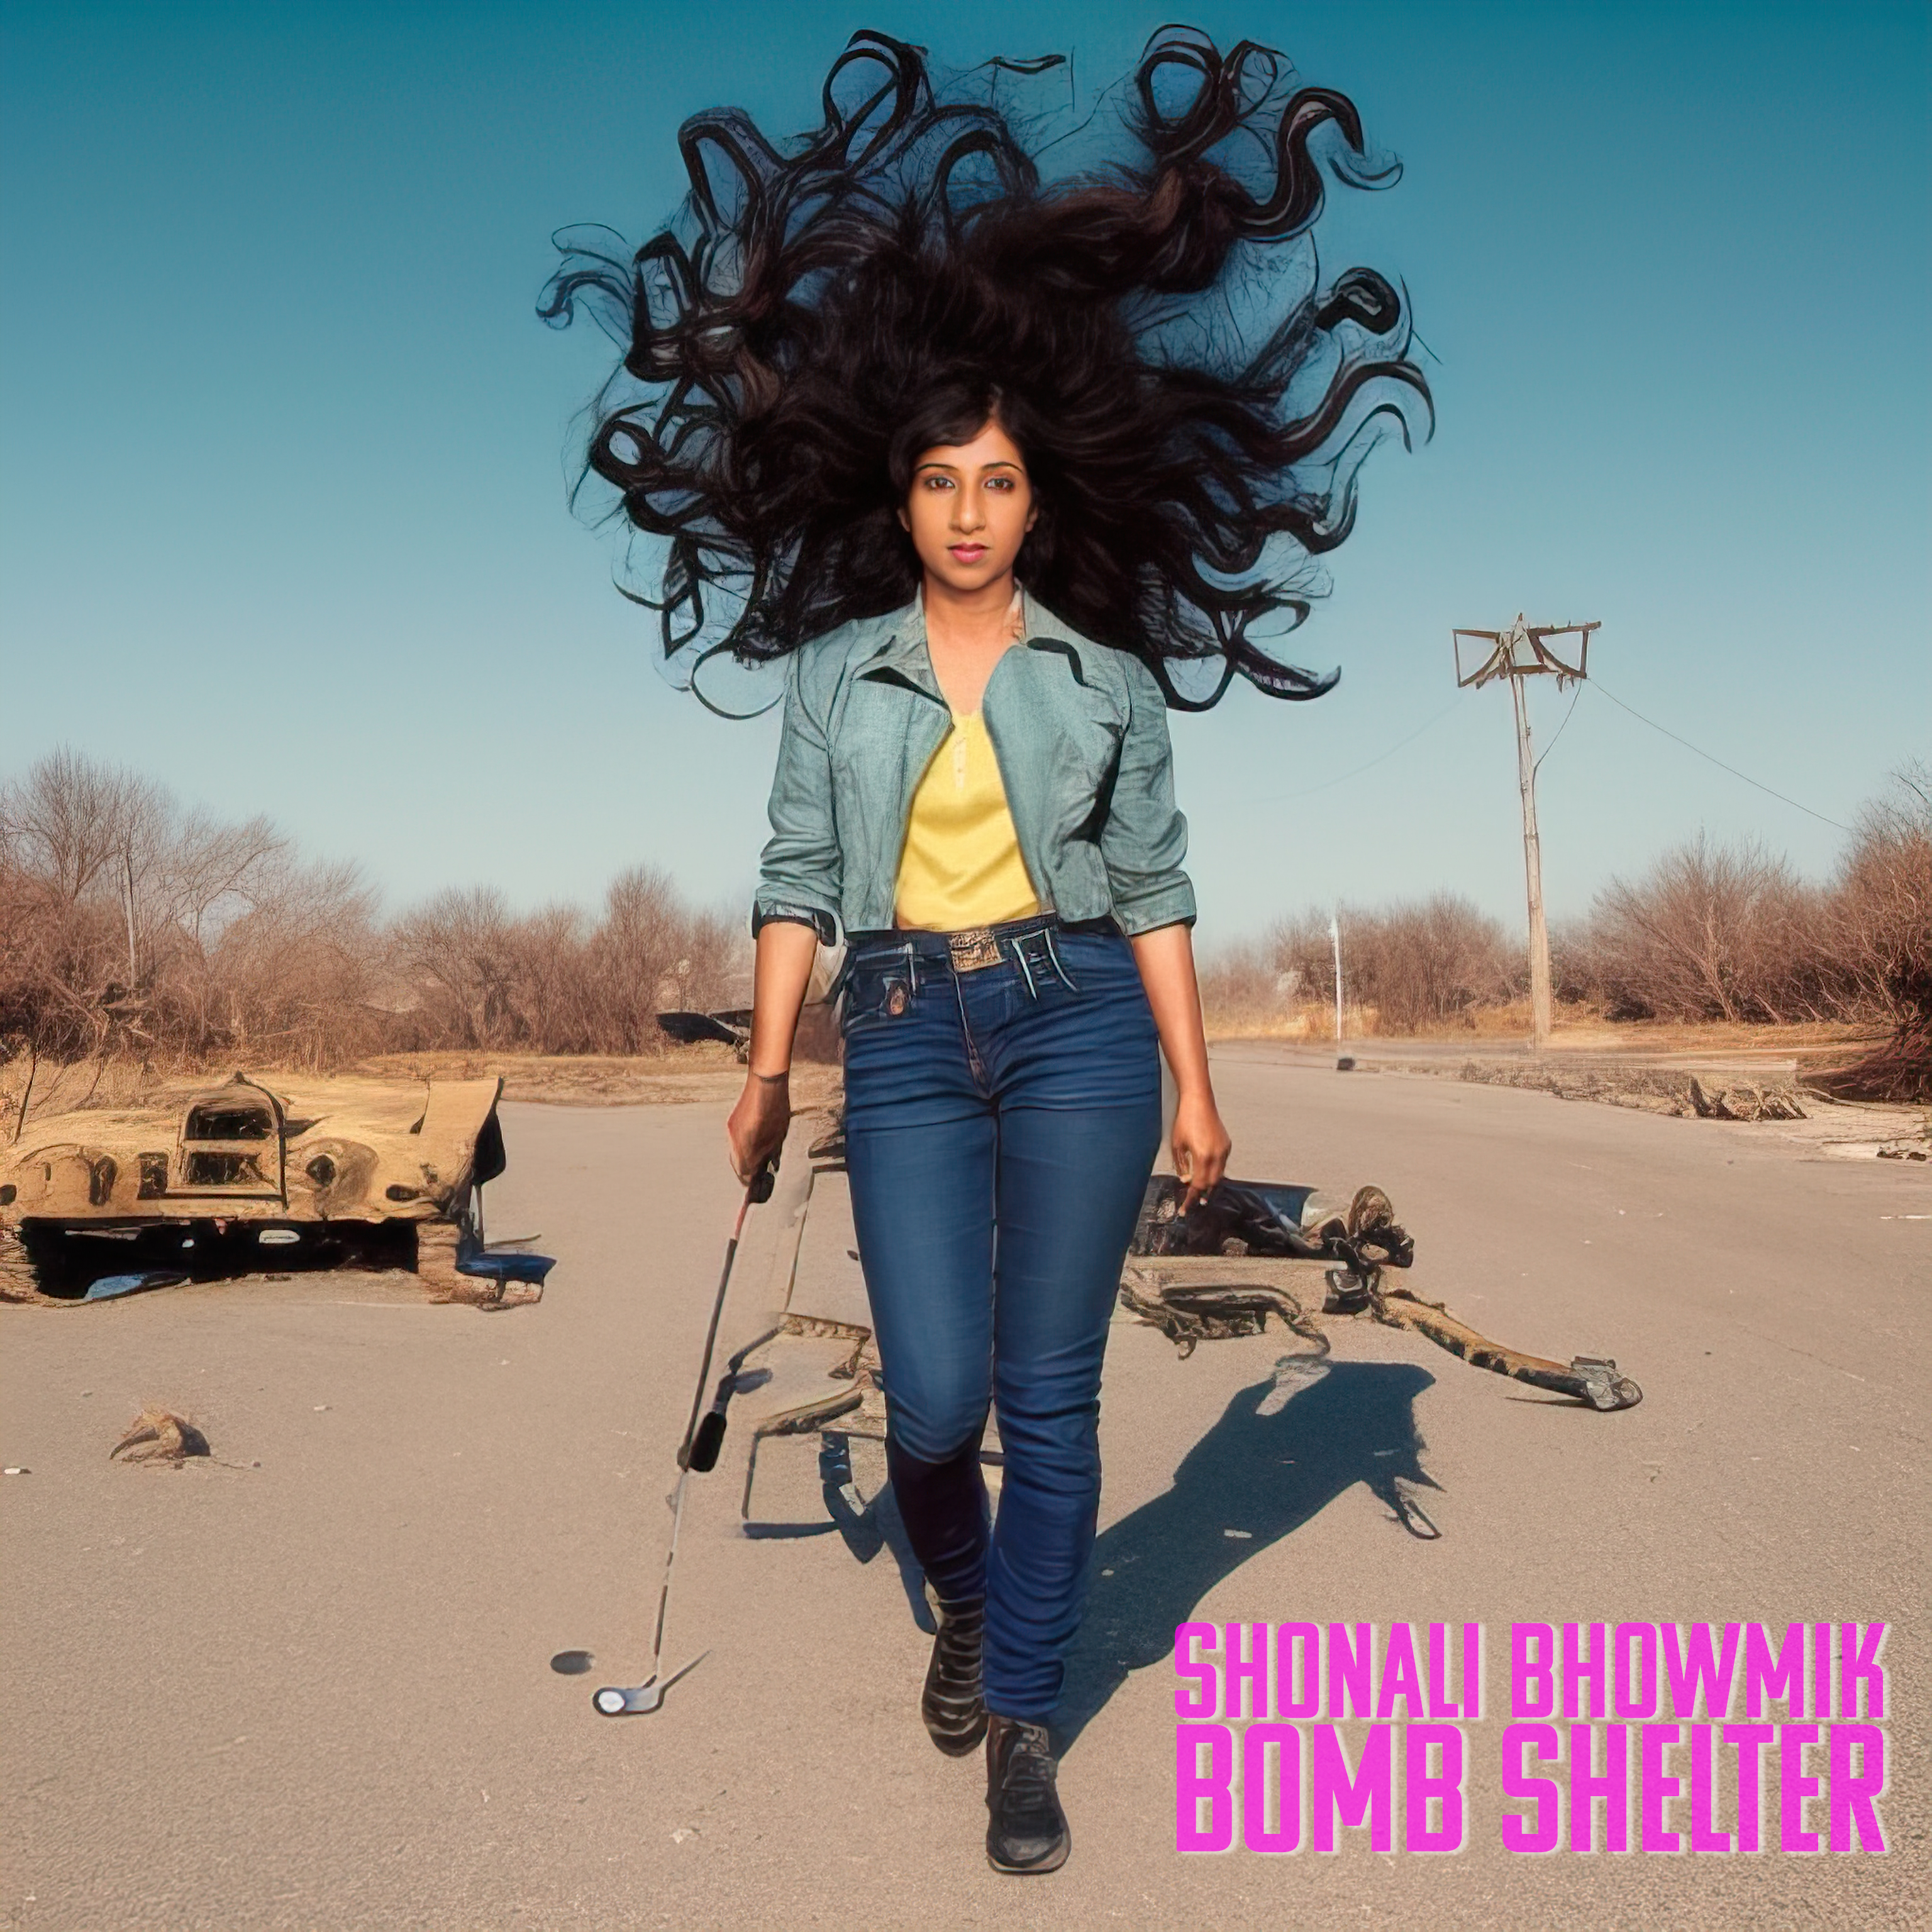 Pre-Save New Single Bomb Shelter NOW https://show.co/p5NagsI
release date  4/12/23
